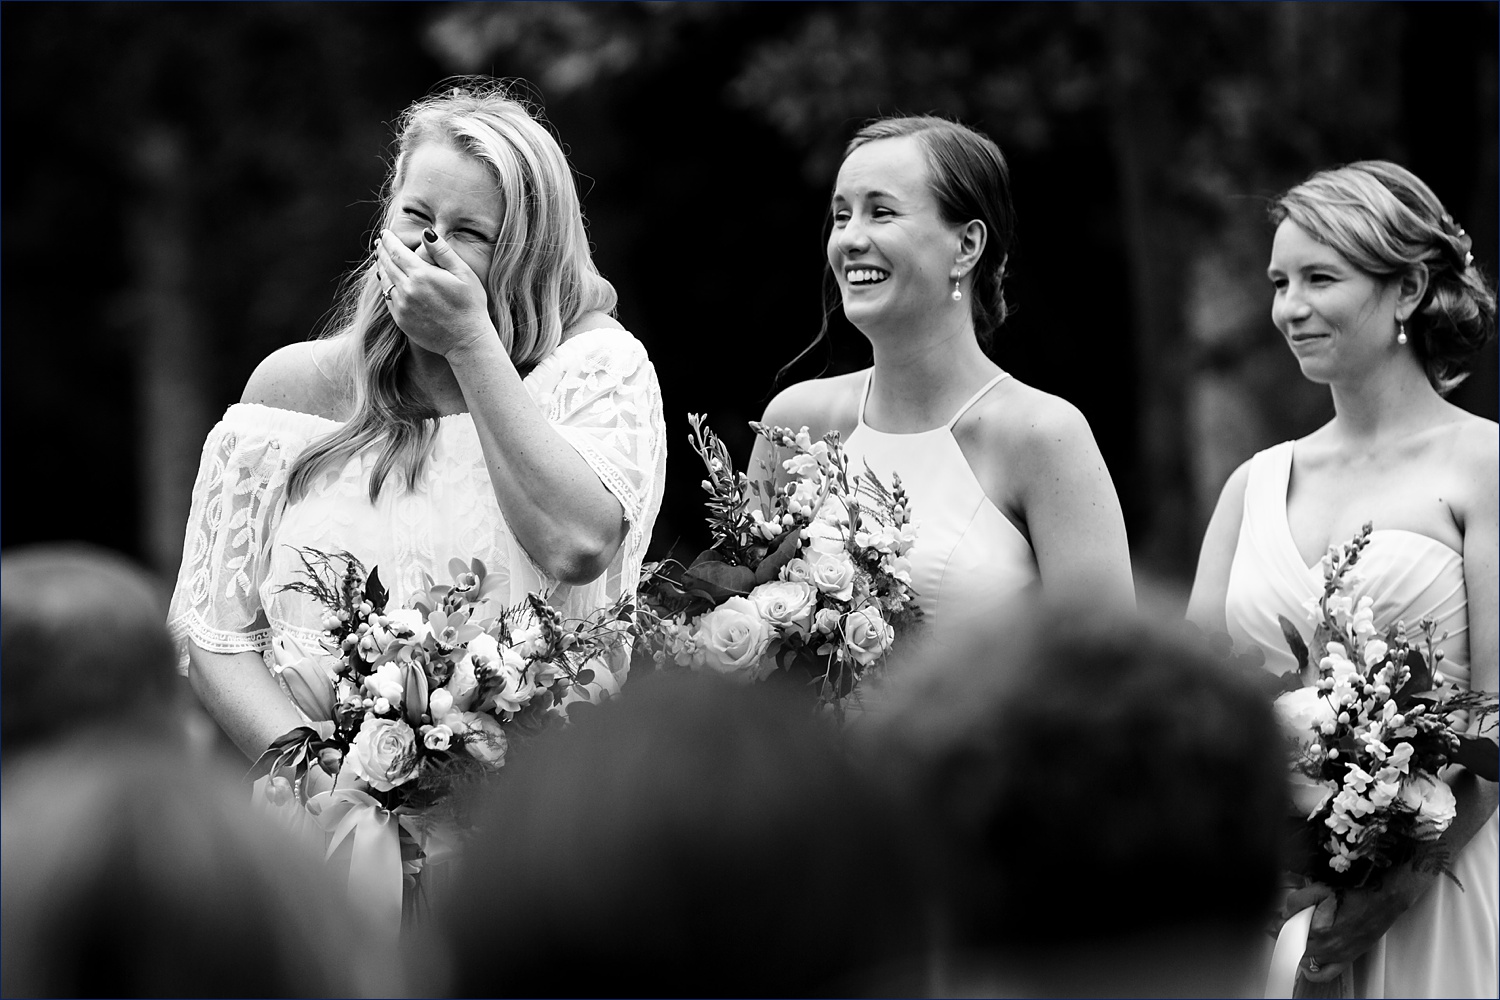 The bride can't contain her laugh on the wedding day during a funny part of the ceremony in NH